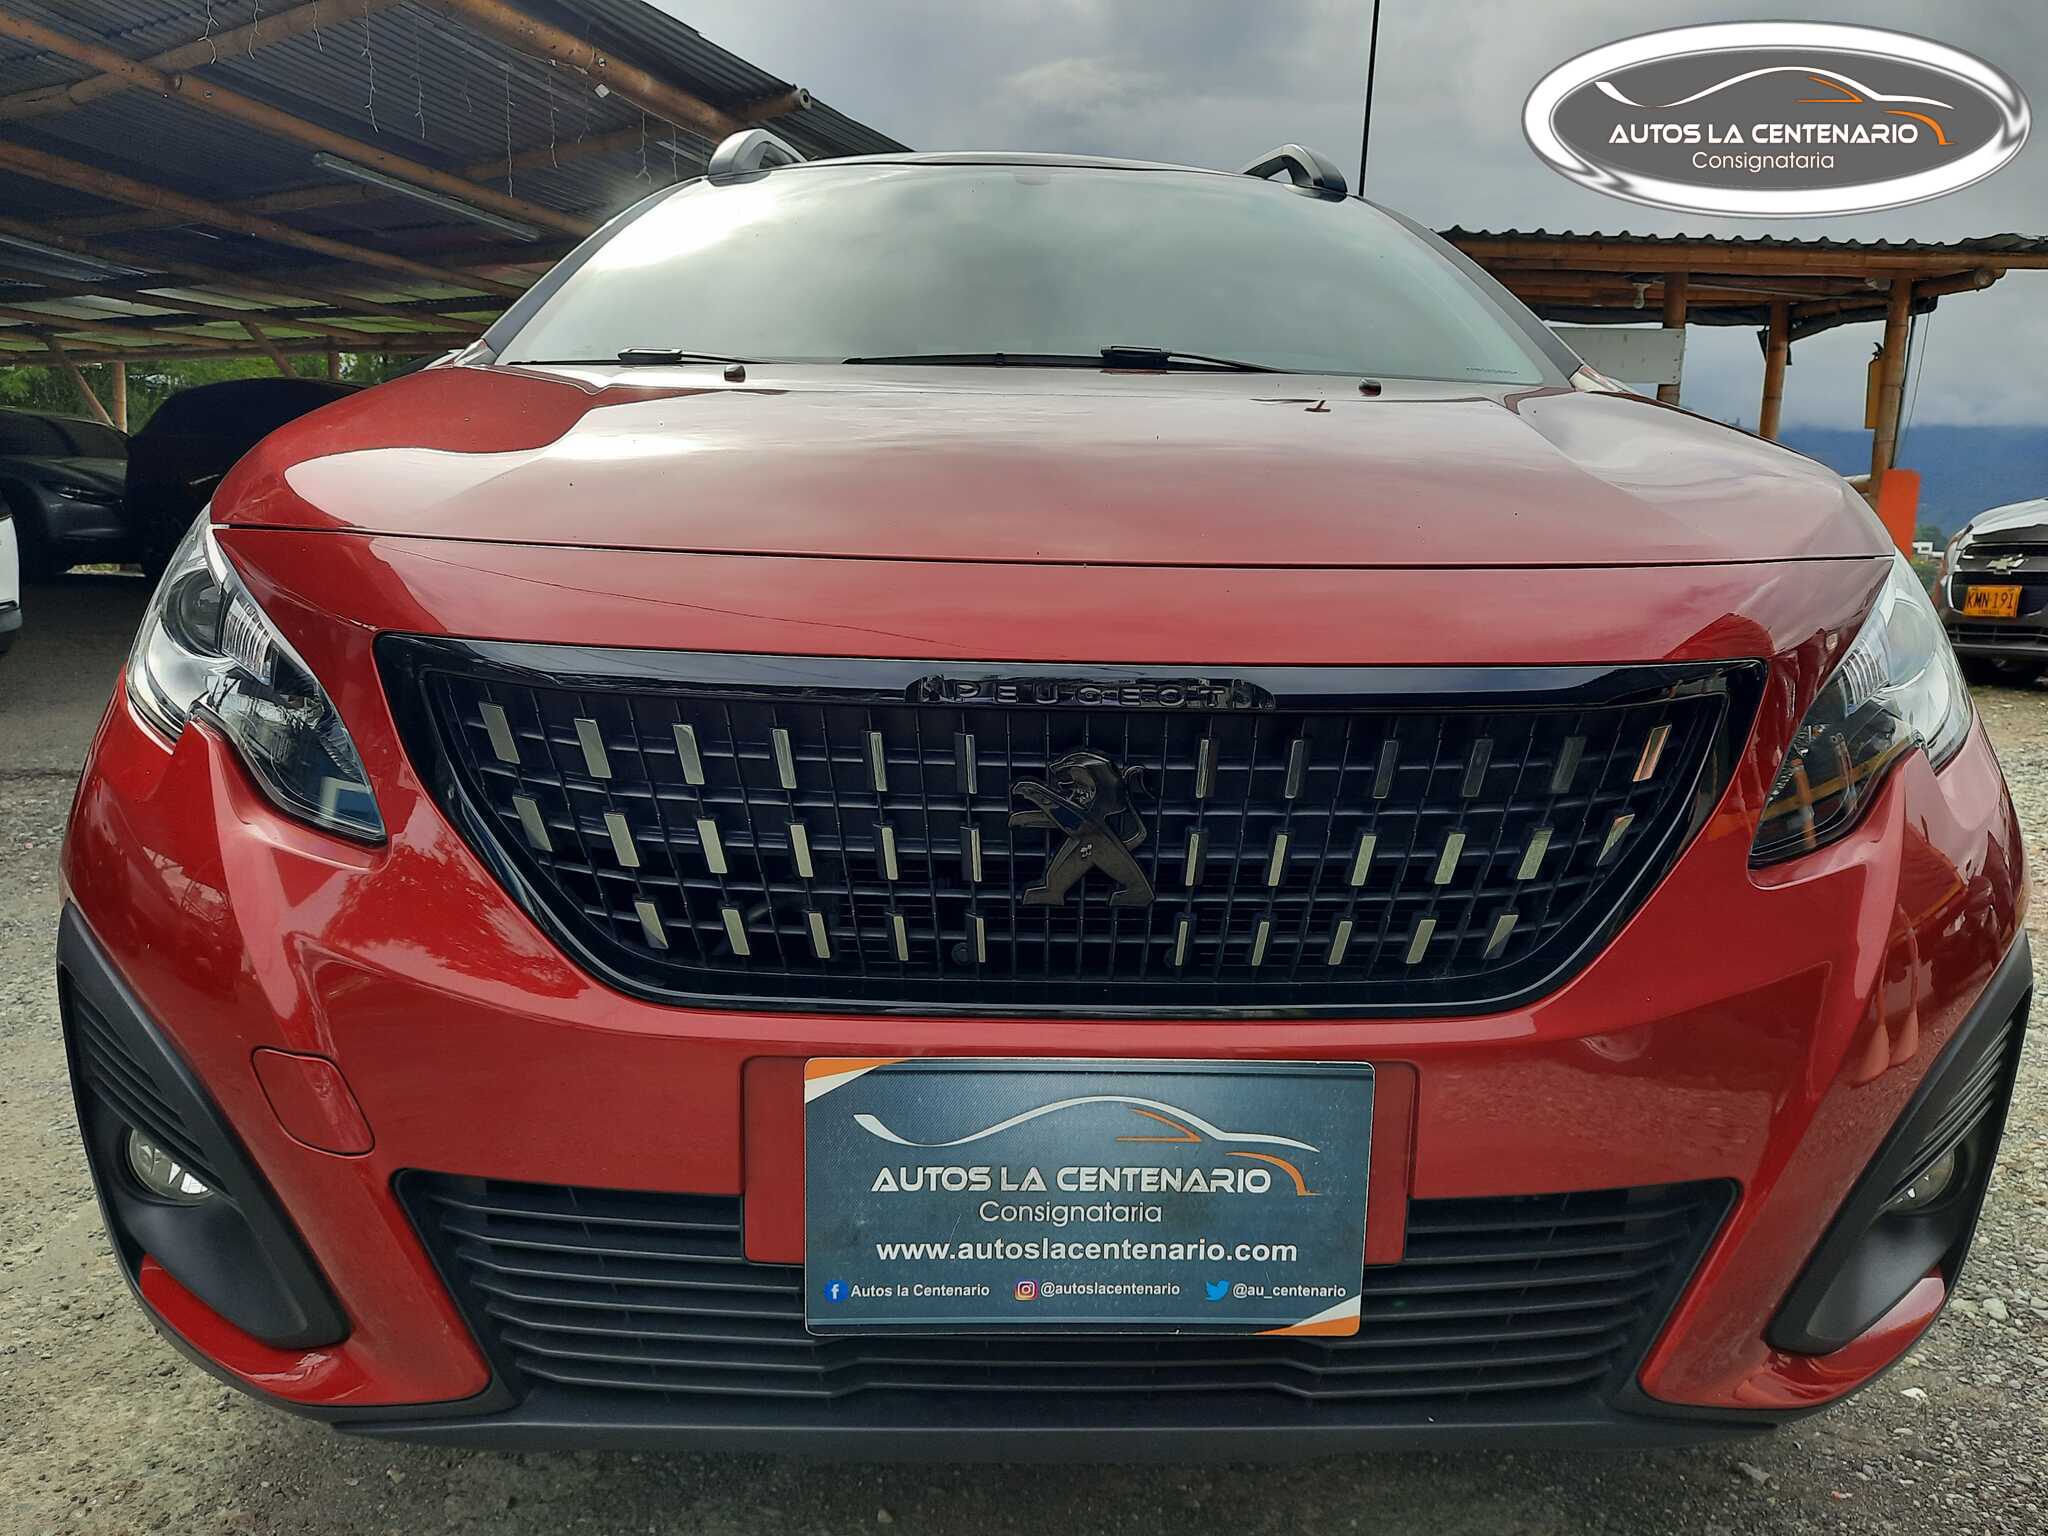 Peugeot-2008 style at